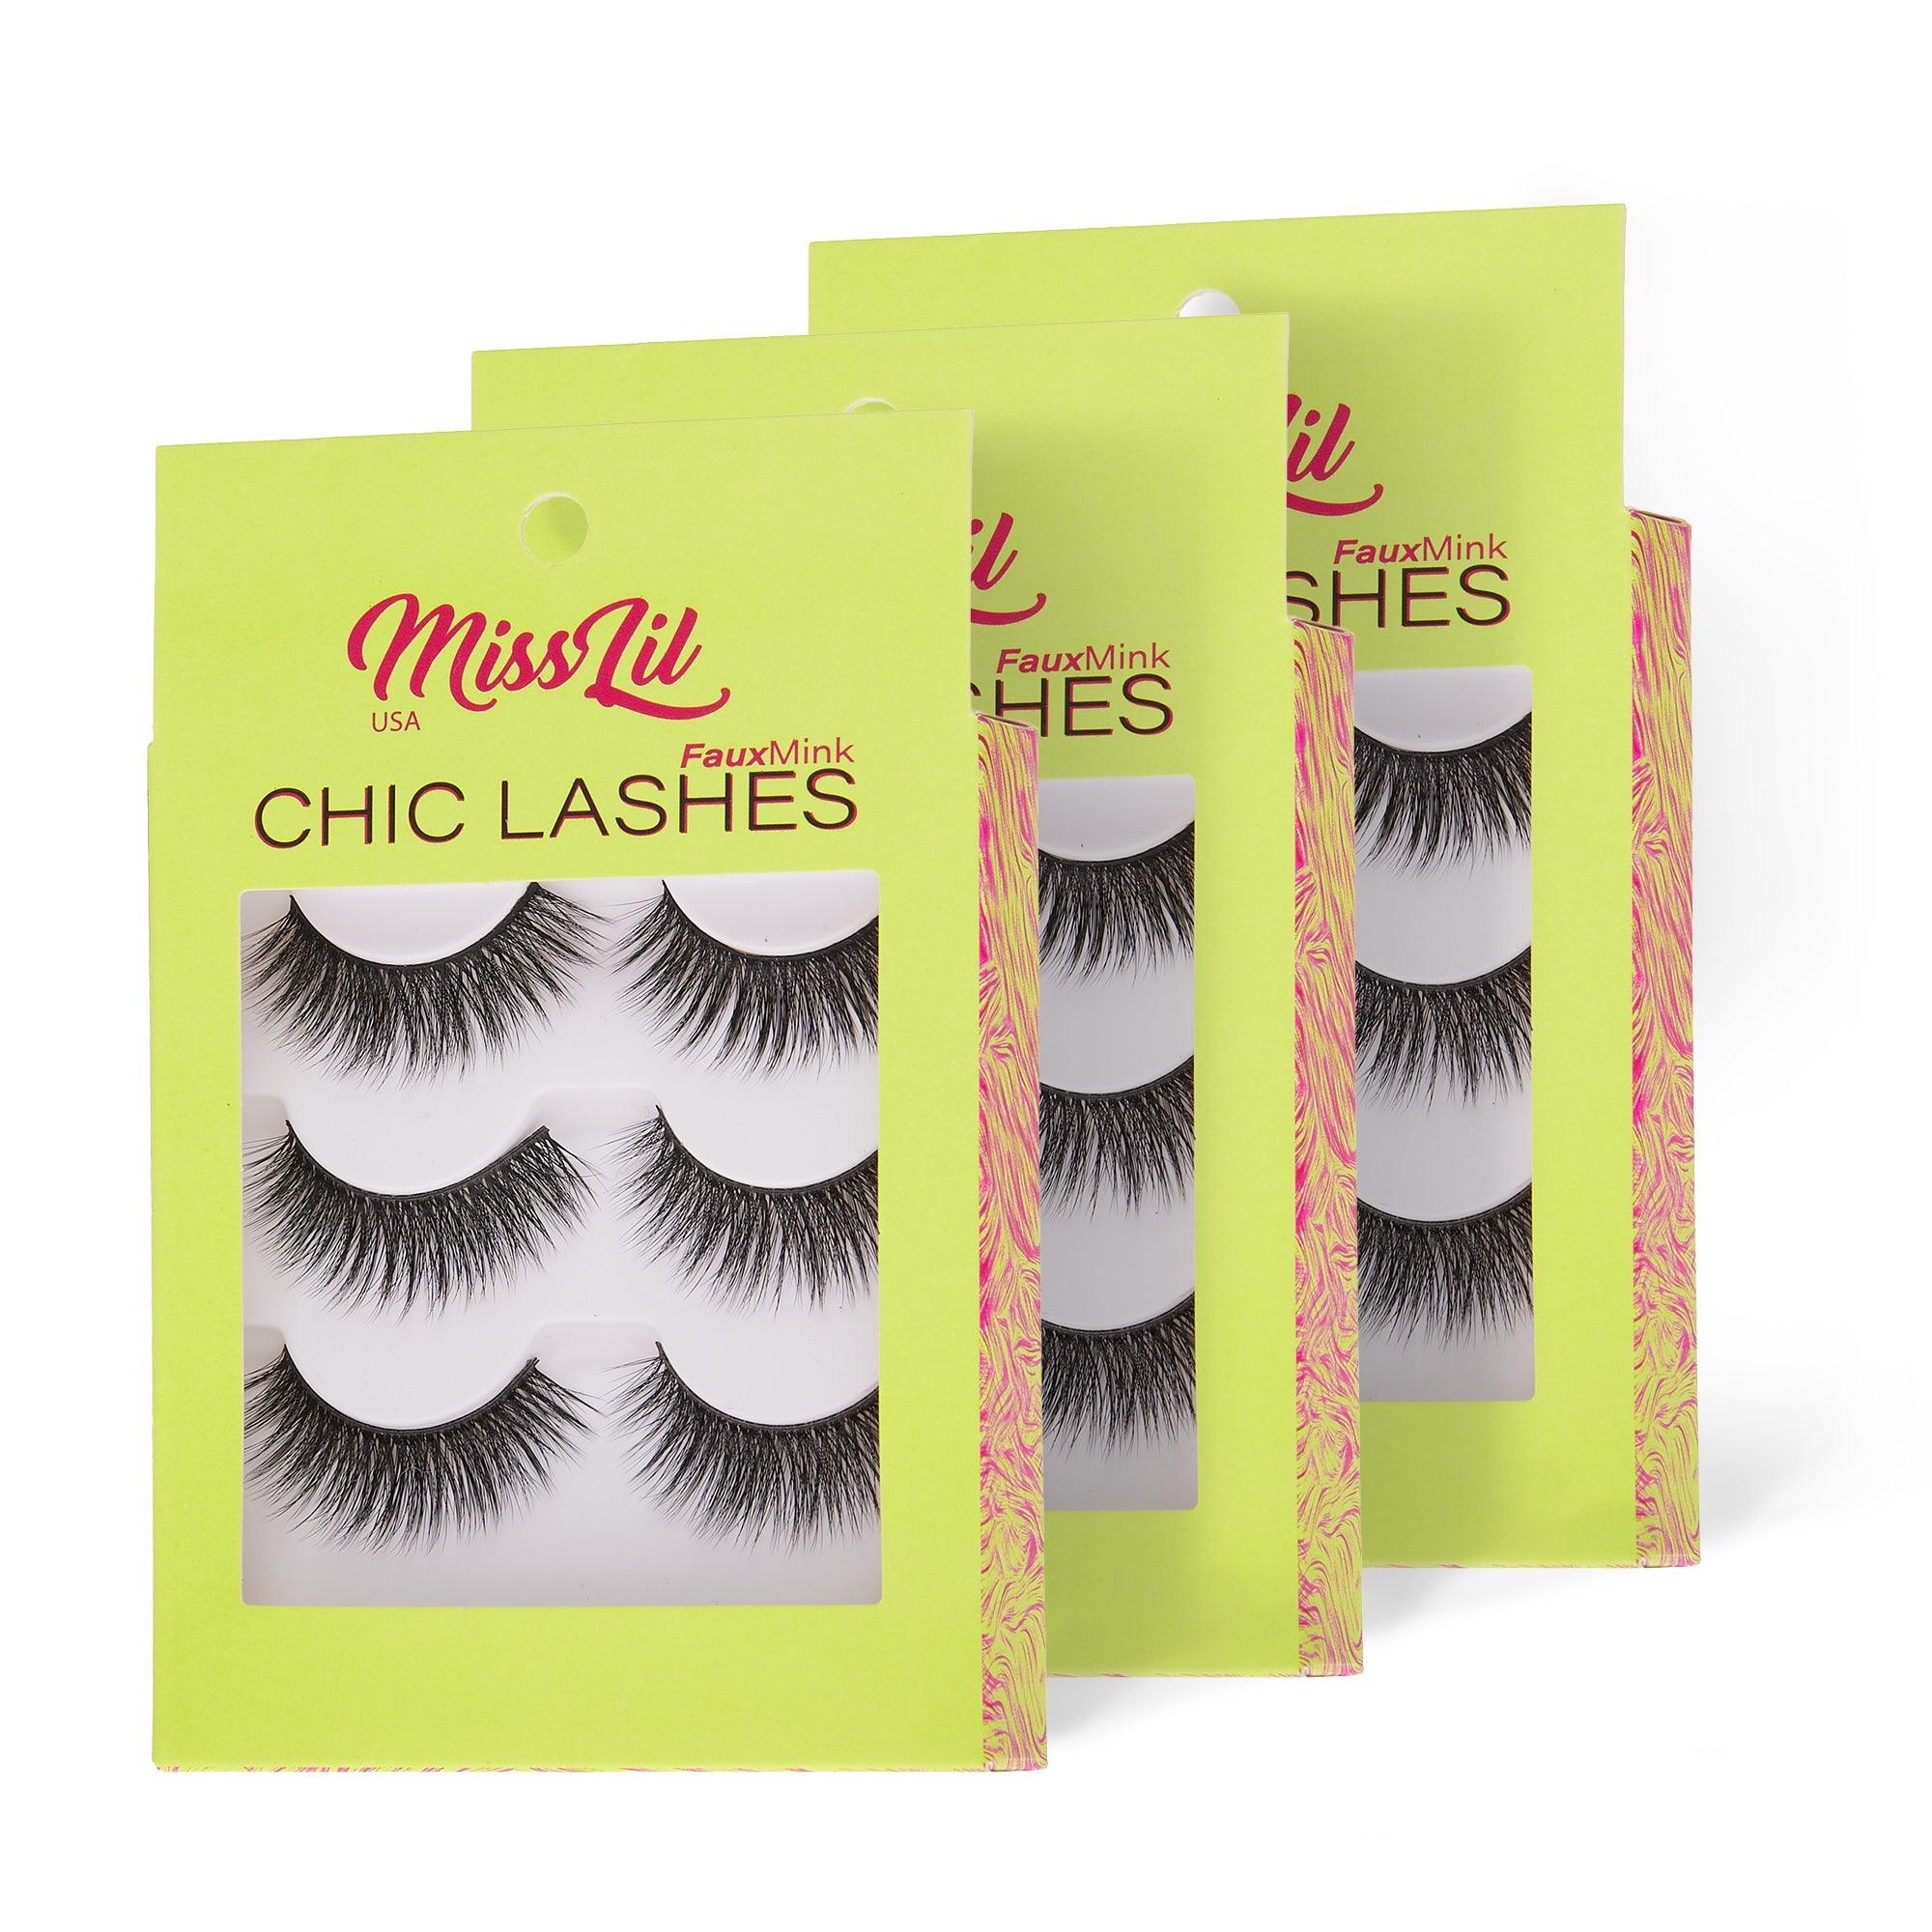 3-Pairs Lashes-Chic Lashes Collection #3 ( Pack of 12) - Miss Lil USA Wholesale